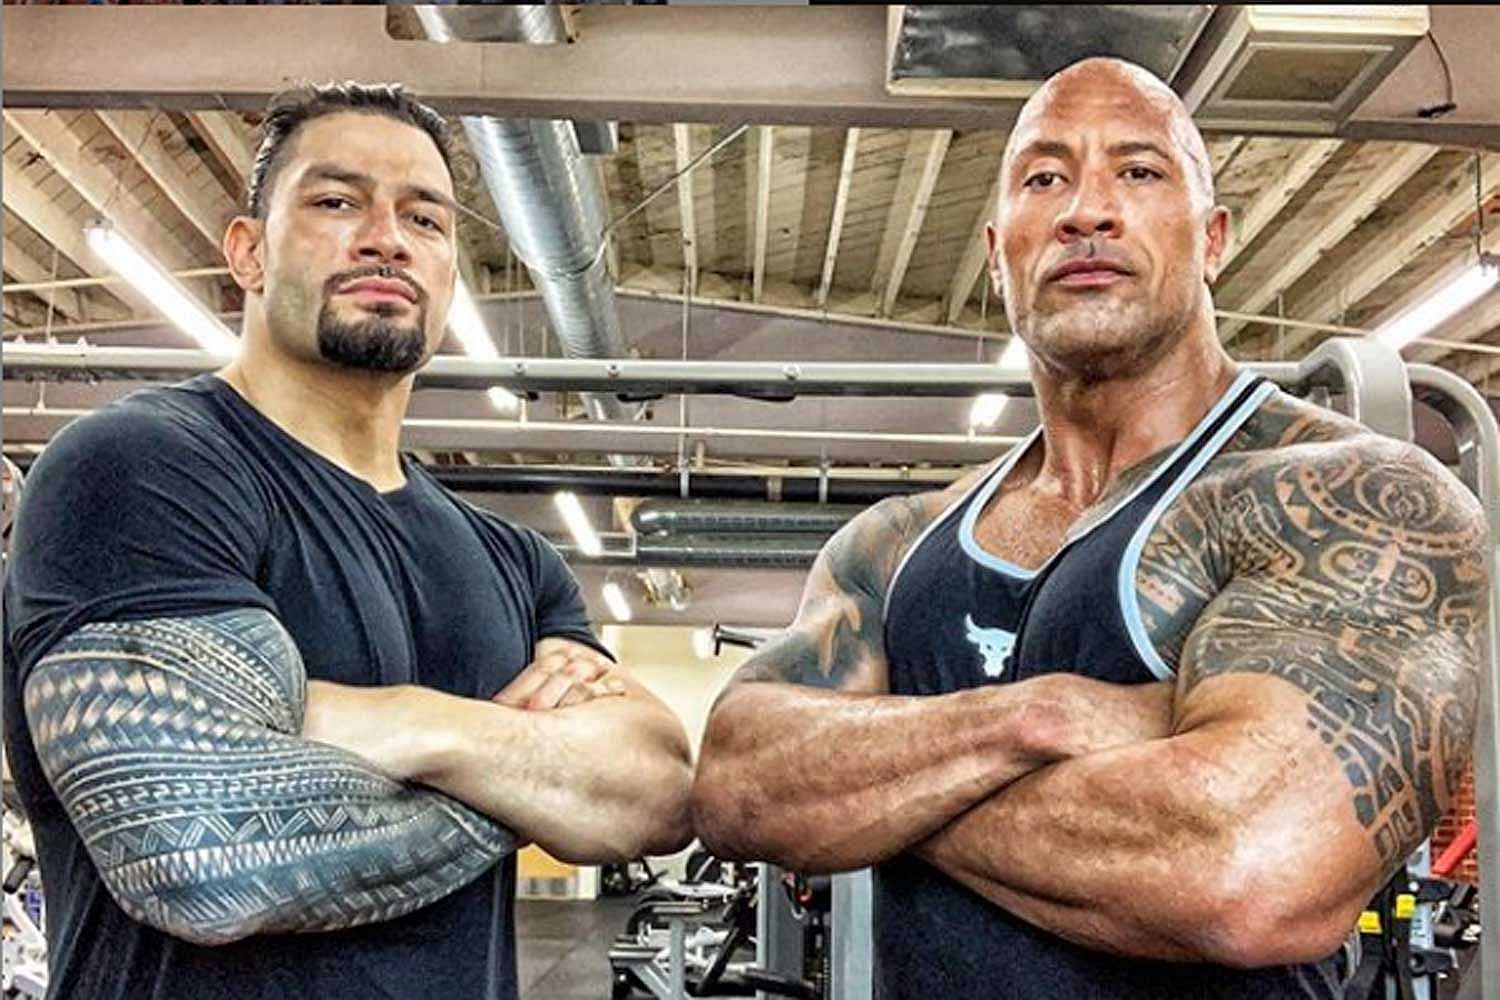 The Rock vs. Roman Reigns was originally planned for WrestleMania 39.